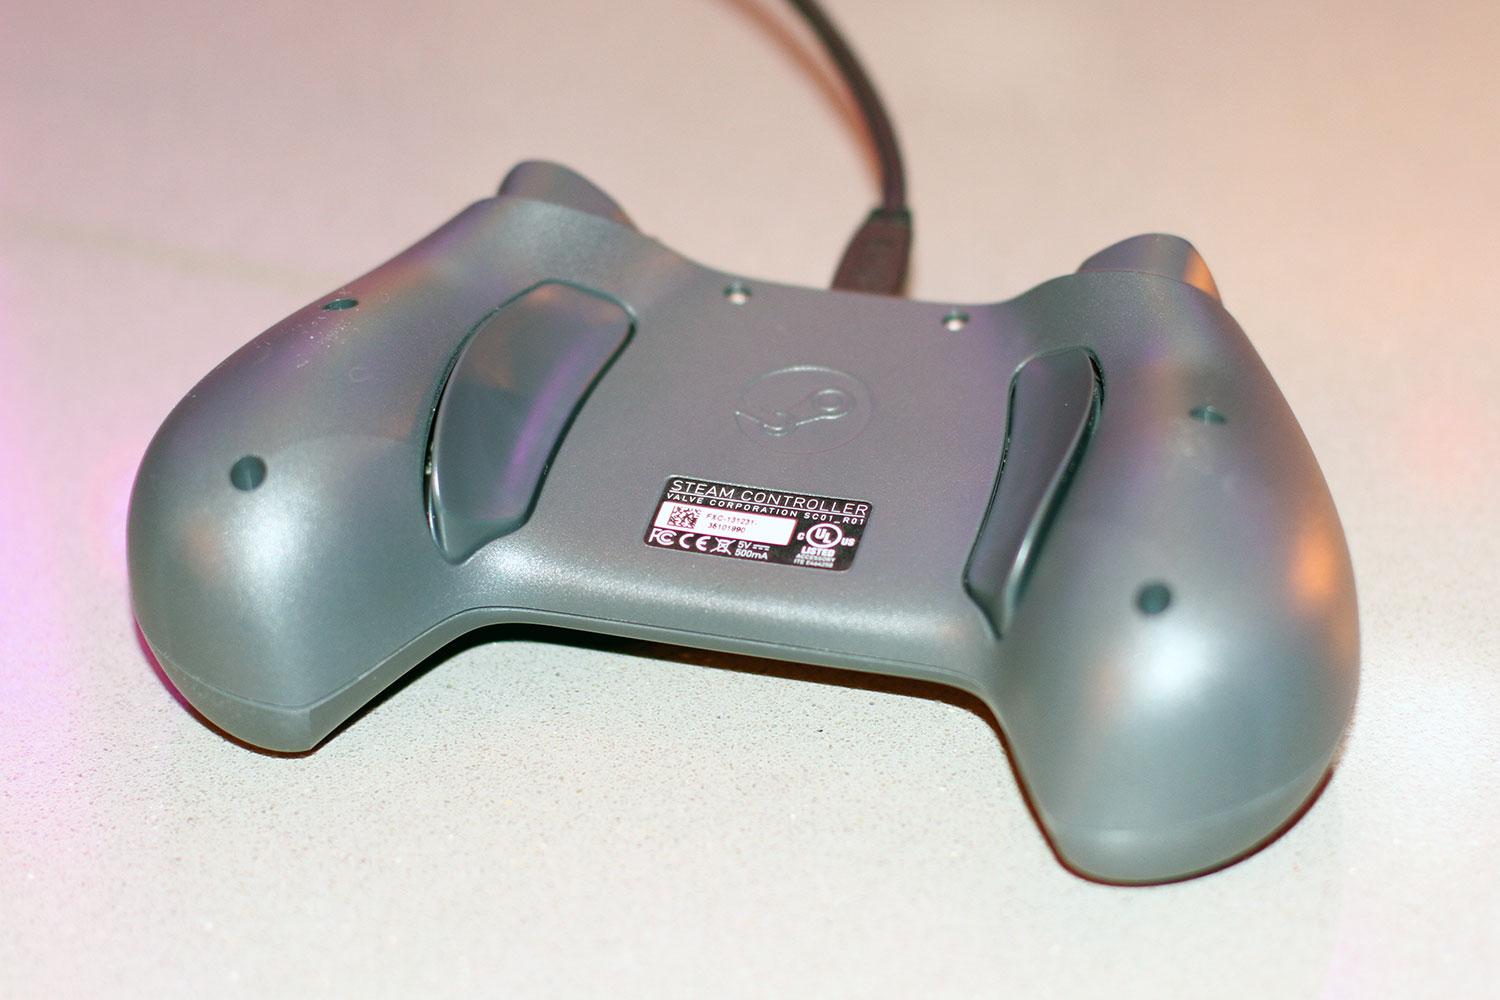 Valve shows off Steam controller with new video